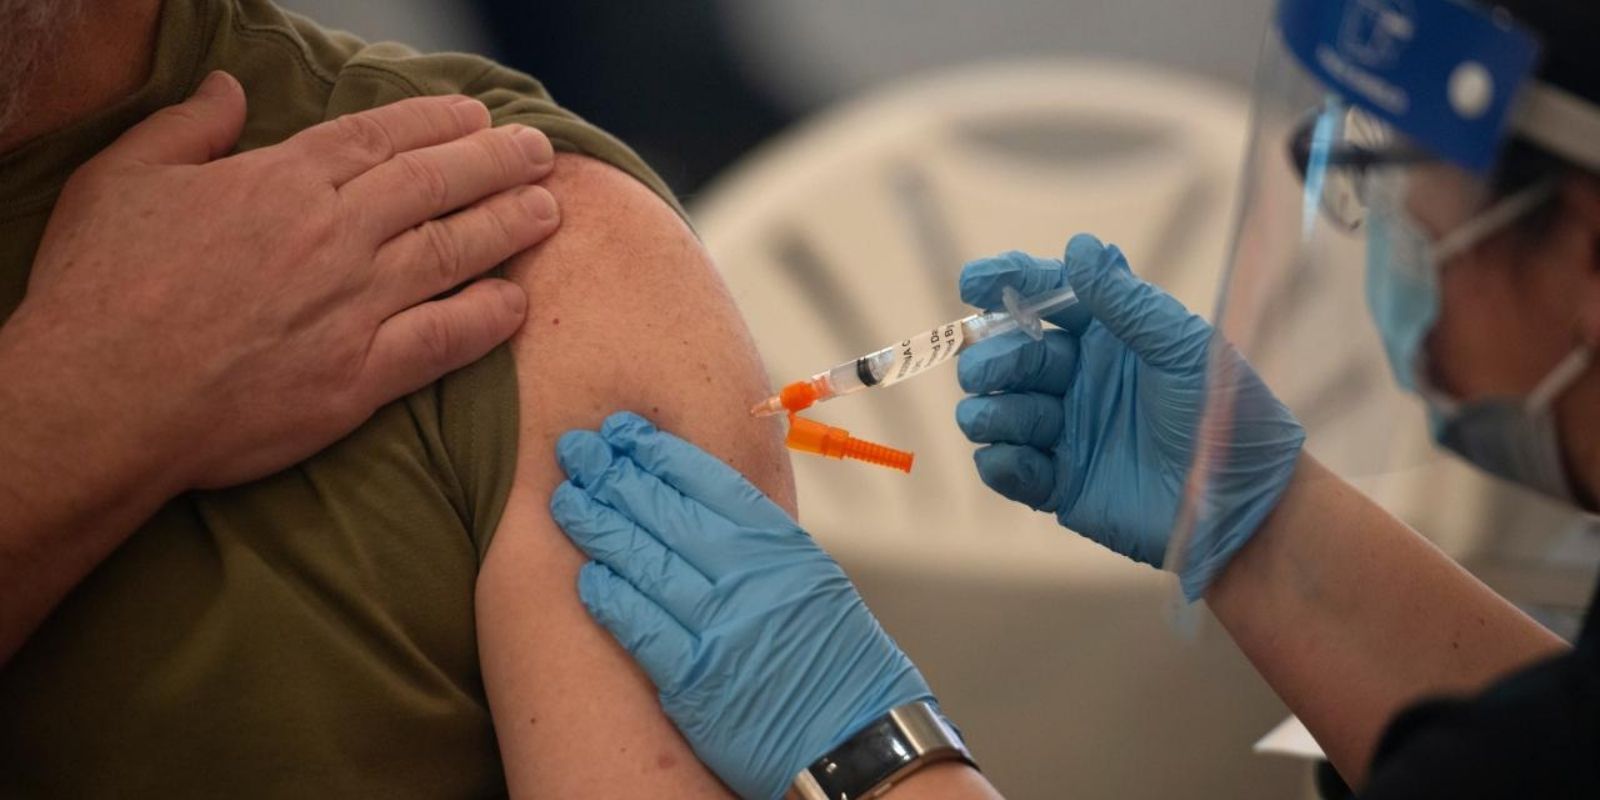 BREAKING: State Department says Americans fleeing Ukraine must show proof of vaccination to enter Poland